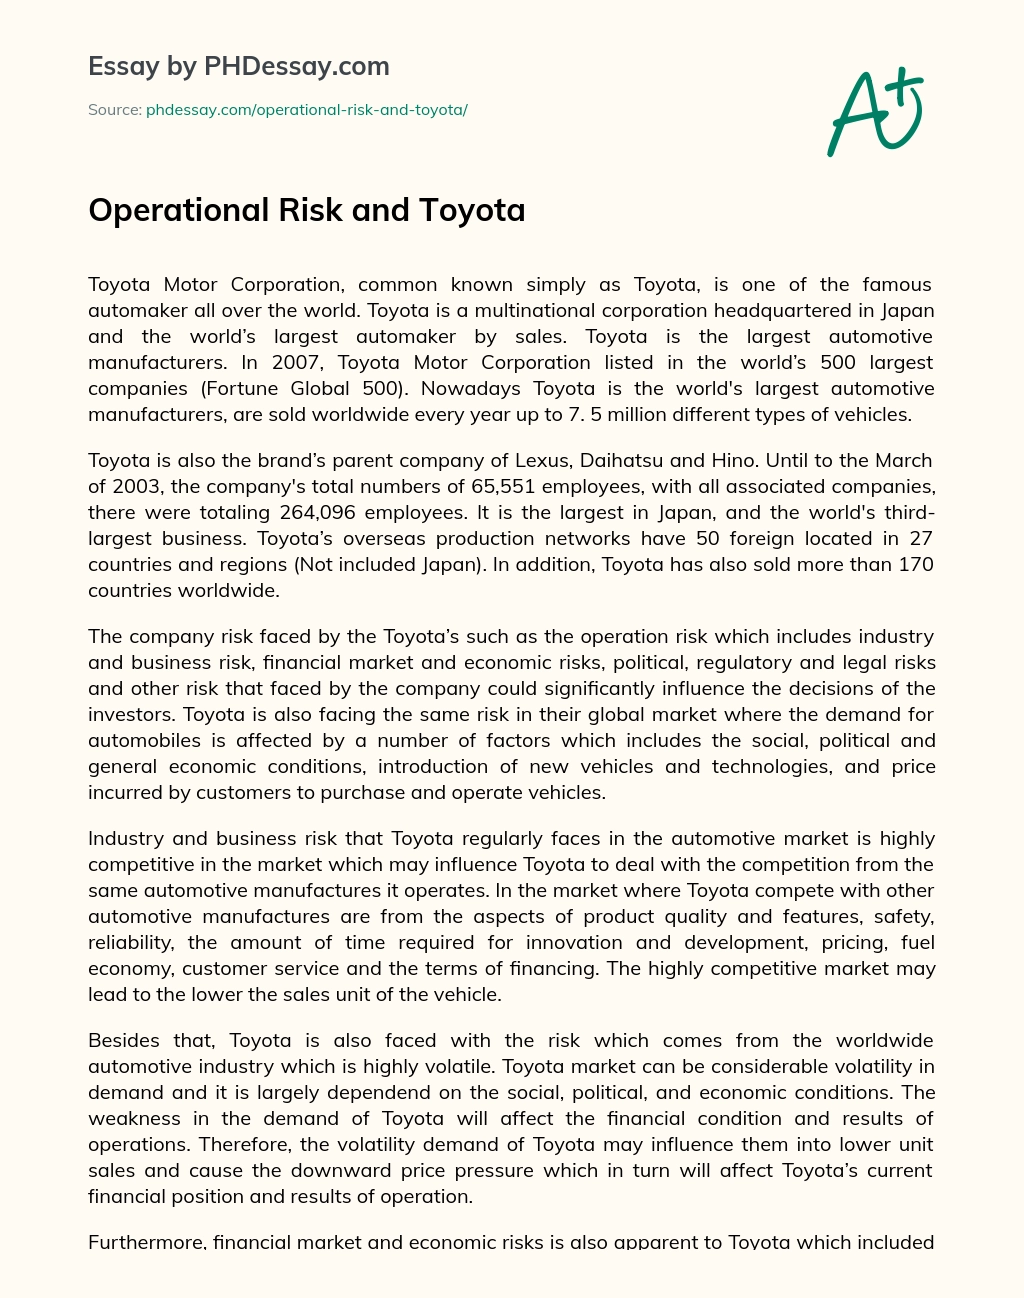 Operational Risk and Toyota essay